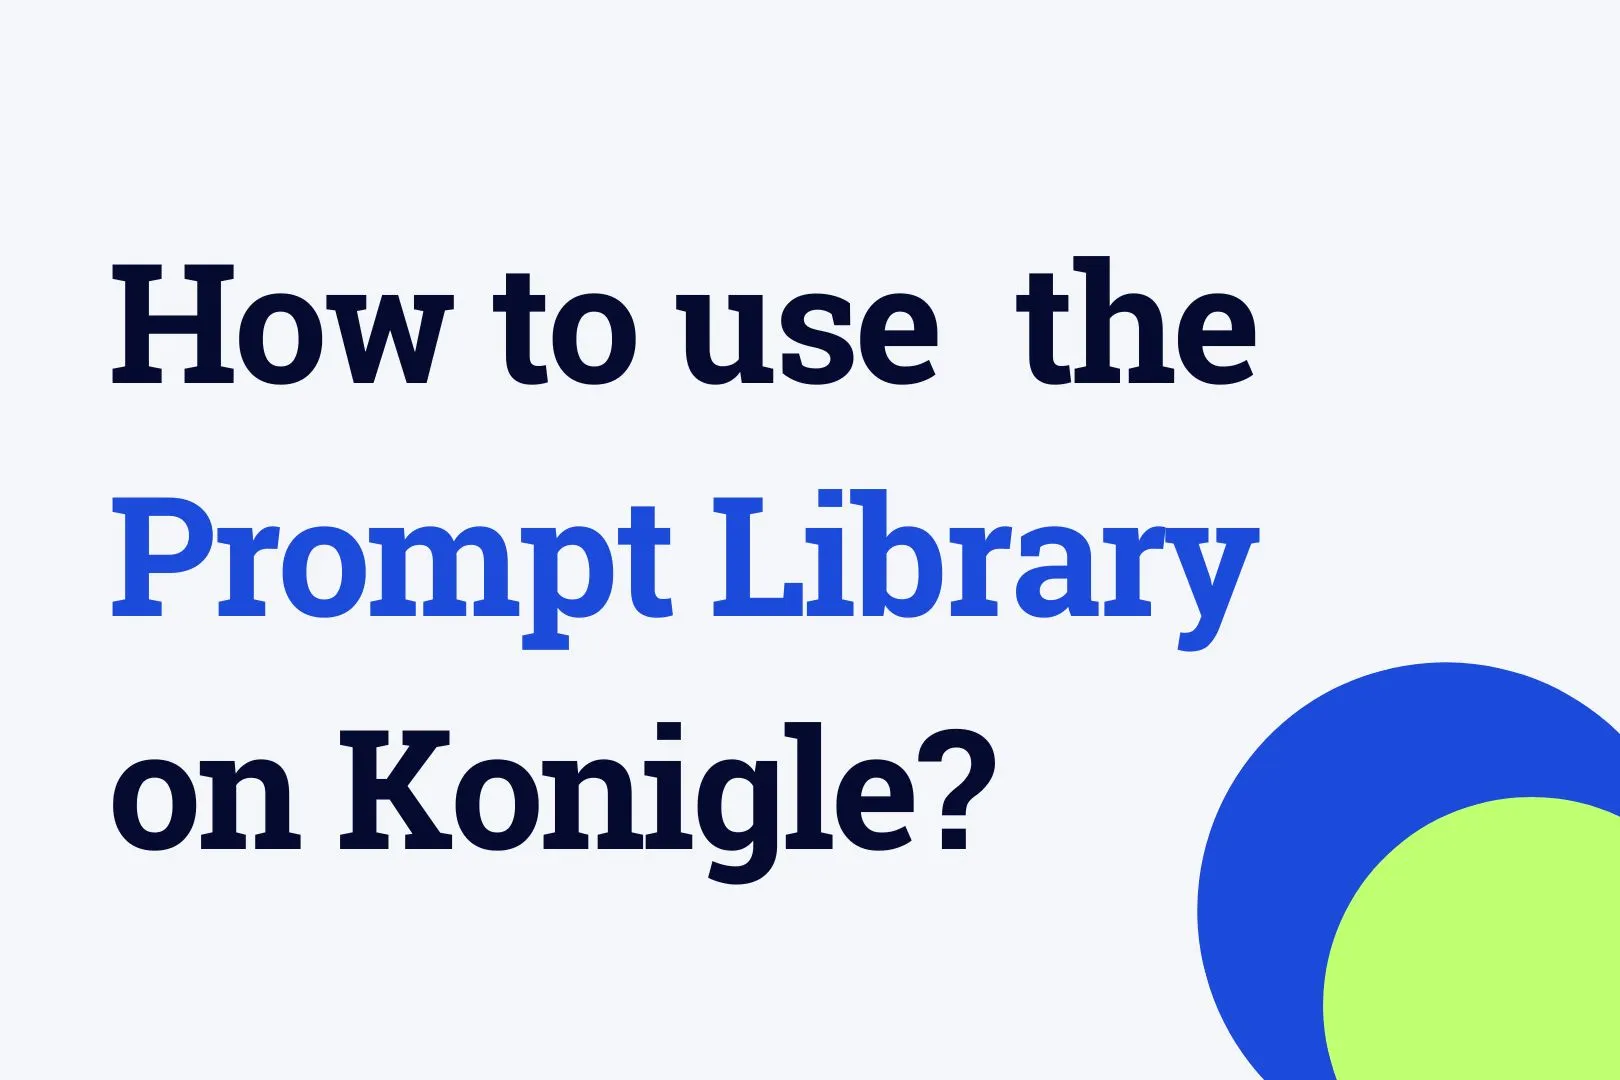 How to use the Prompt Library on Konigle?